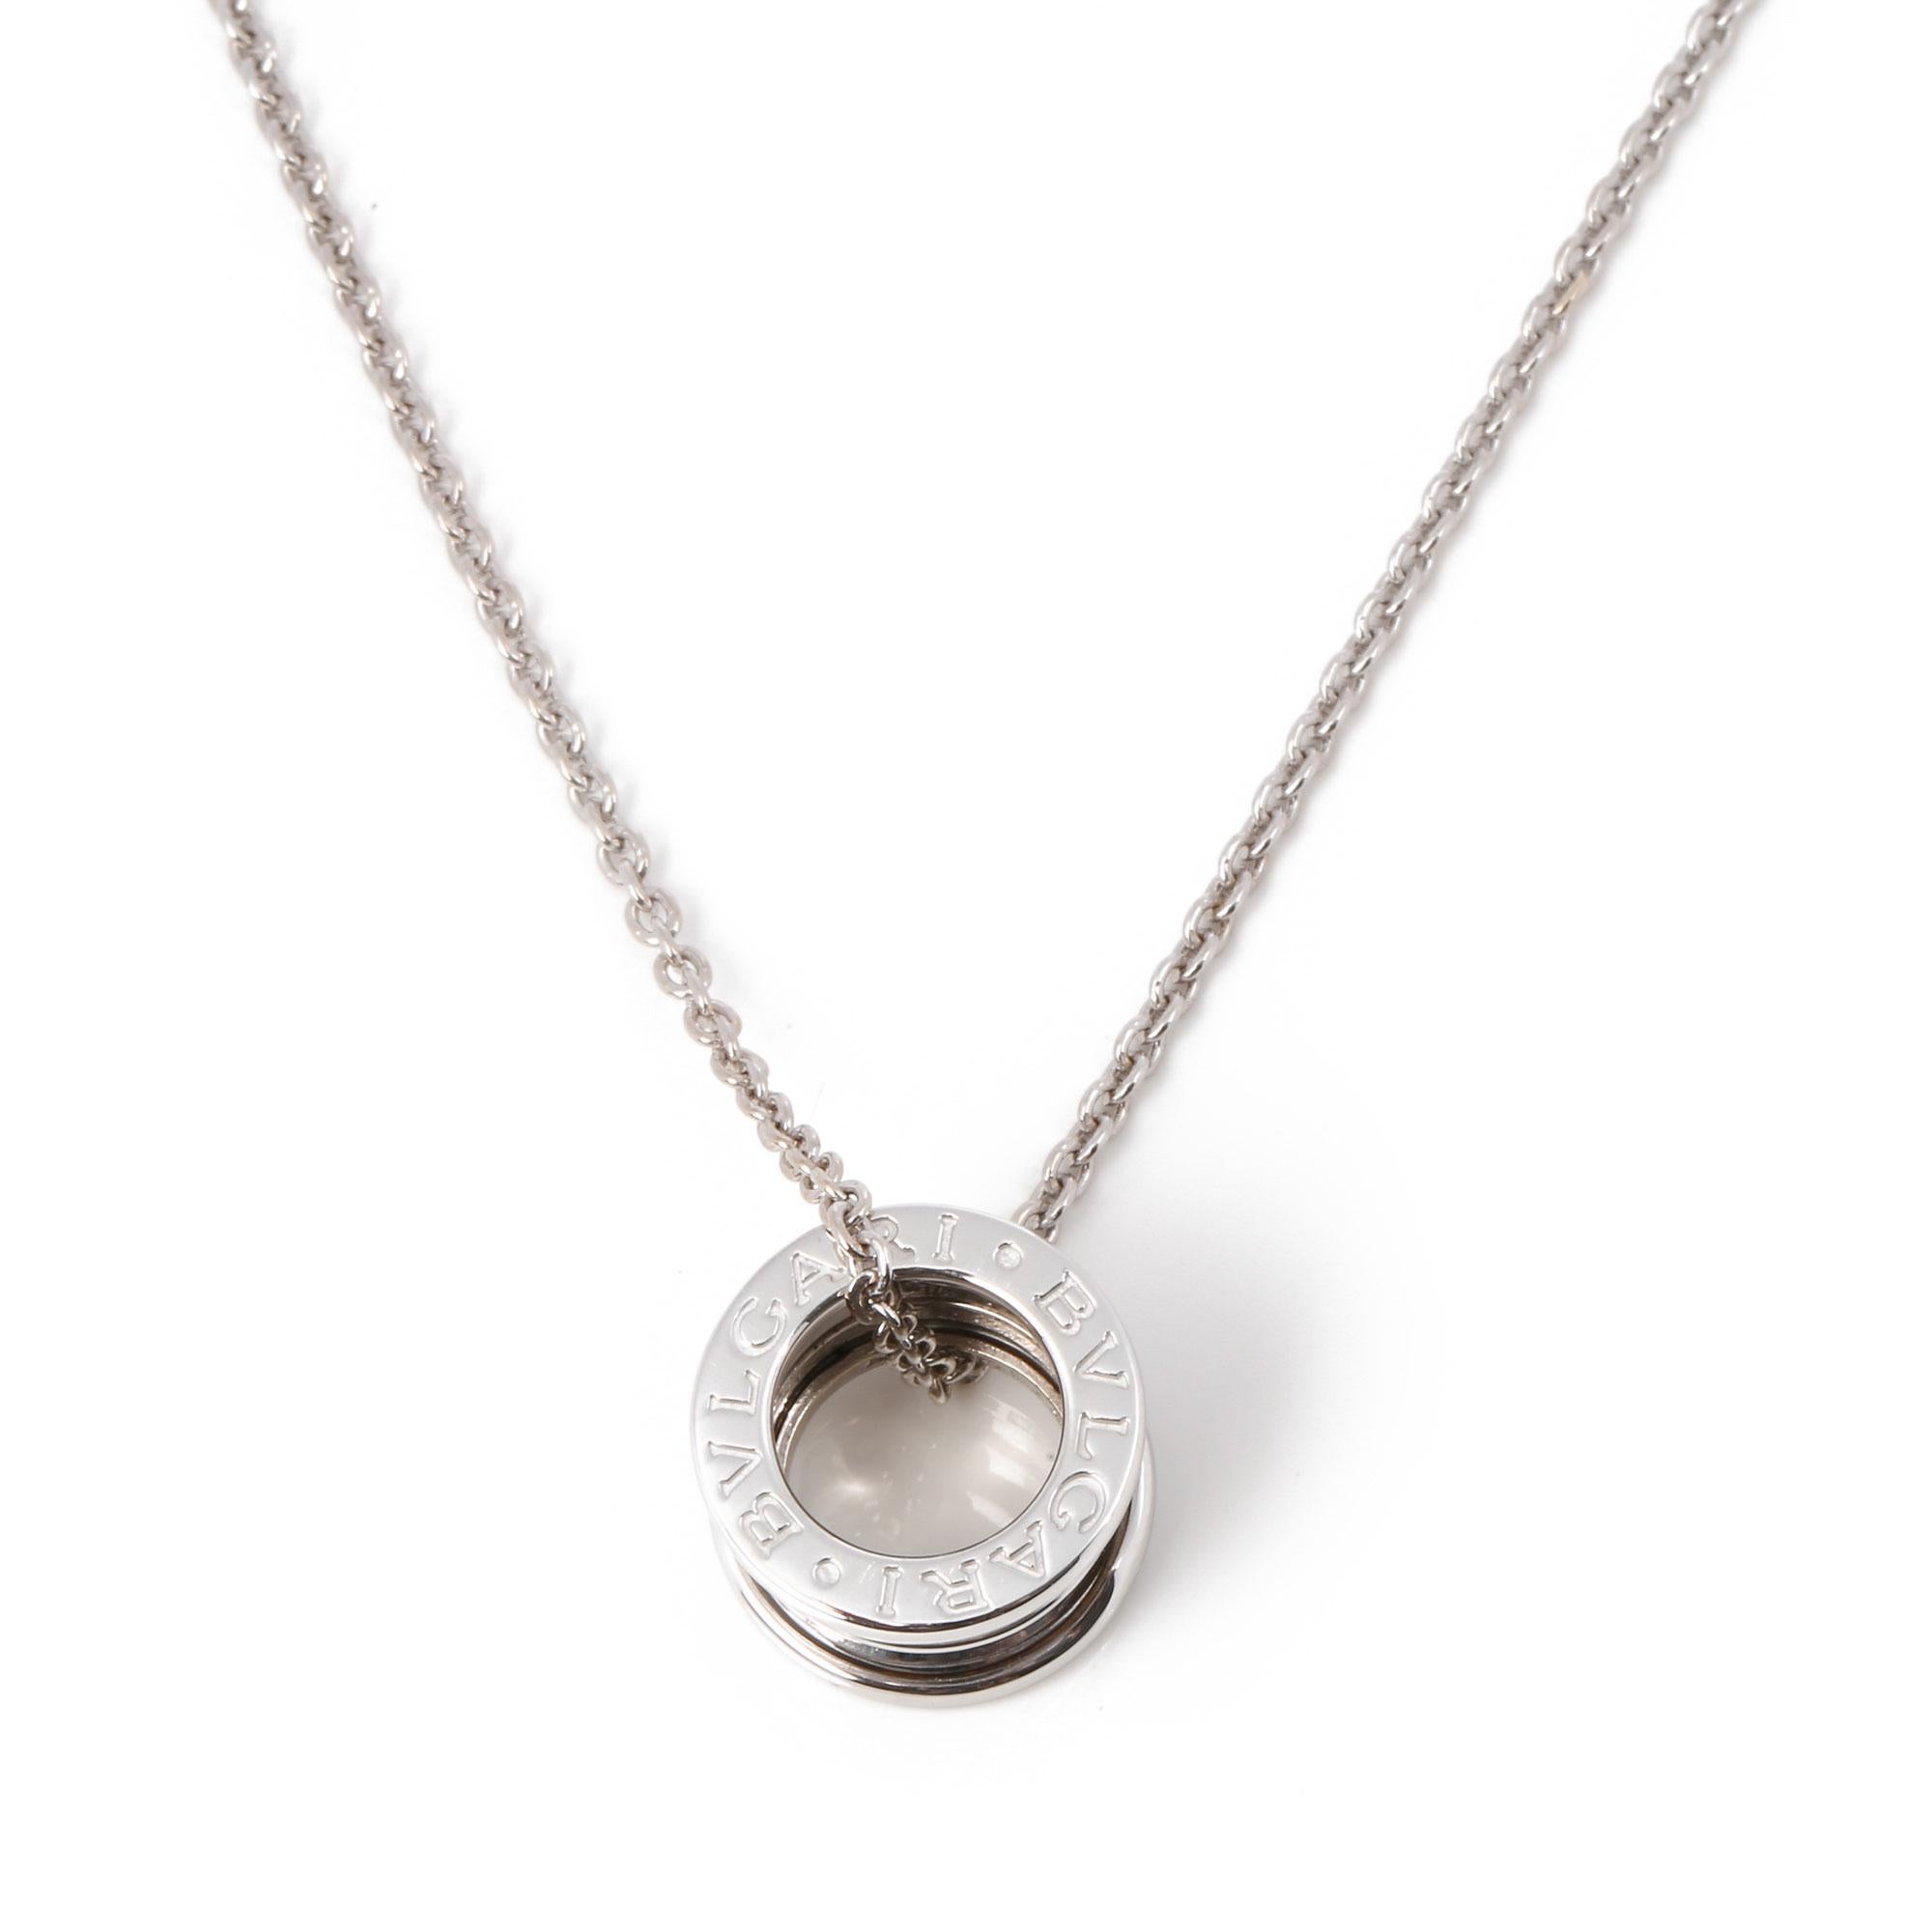 This necklace by Bulgari is from their B Zero 1 collection and features a distinctive three band spiral design in 18ct white gold. Complete with a Xupes presentation box. Our Xupes reference is J700 should you need to quote this.  